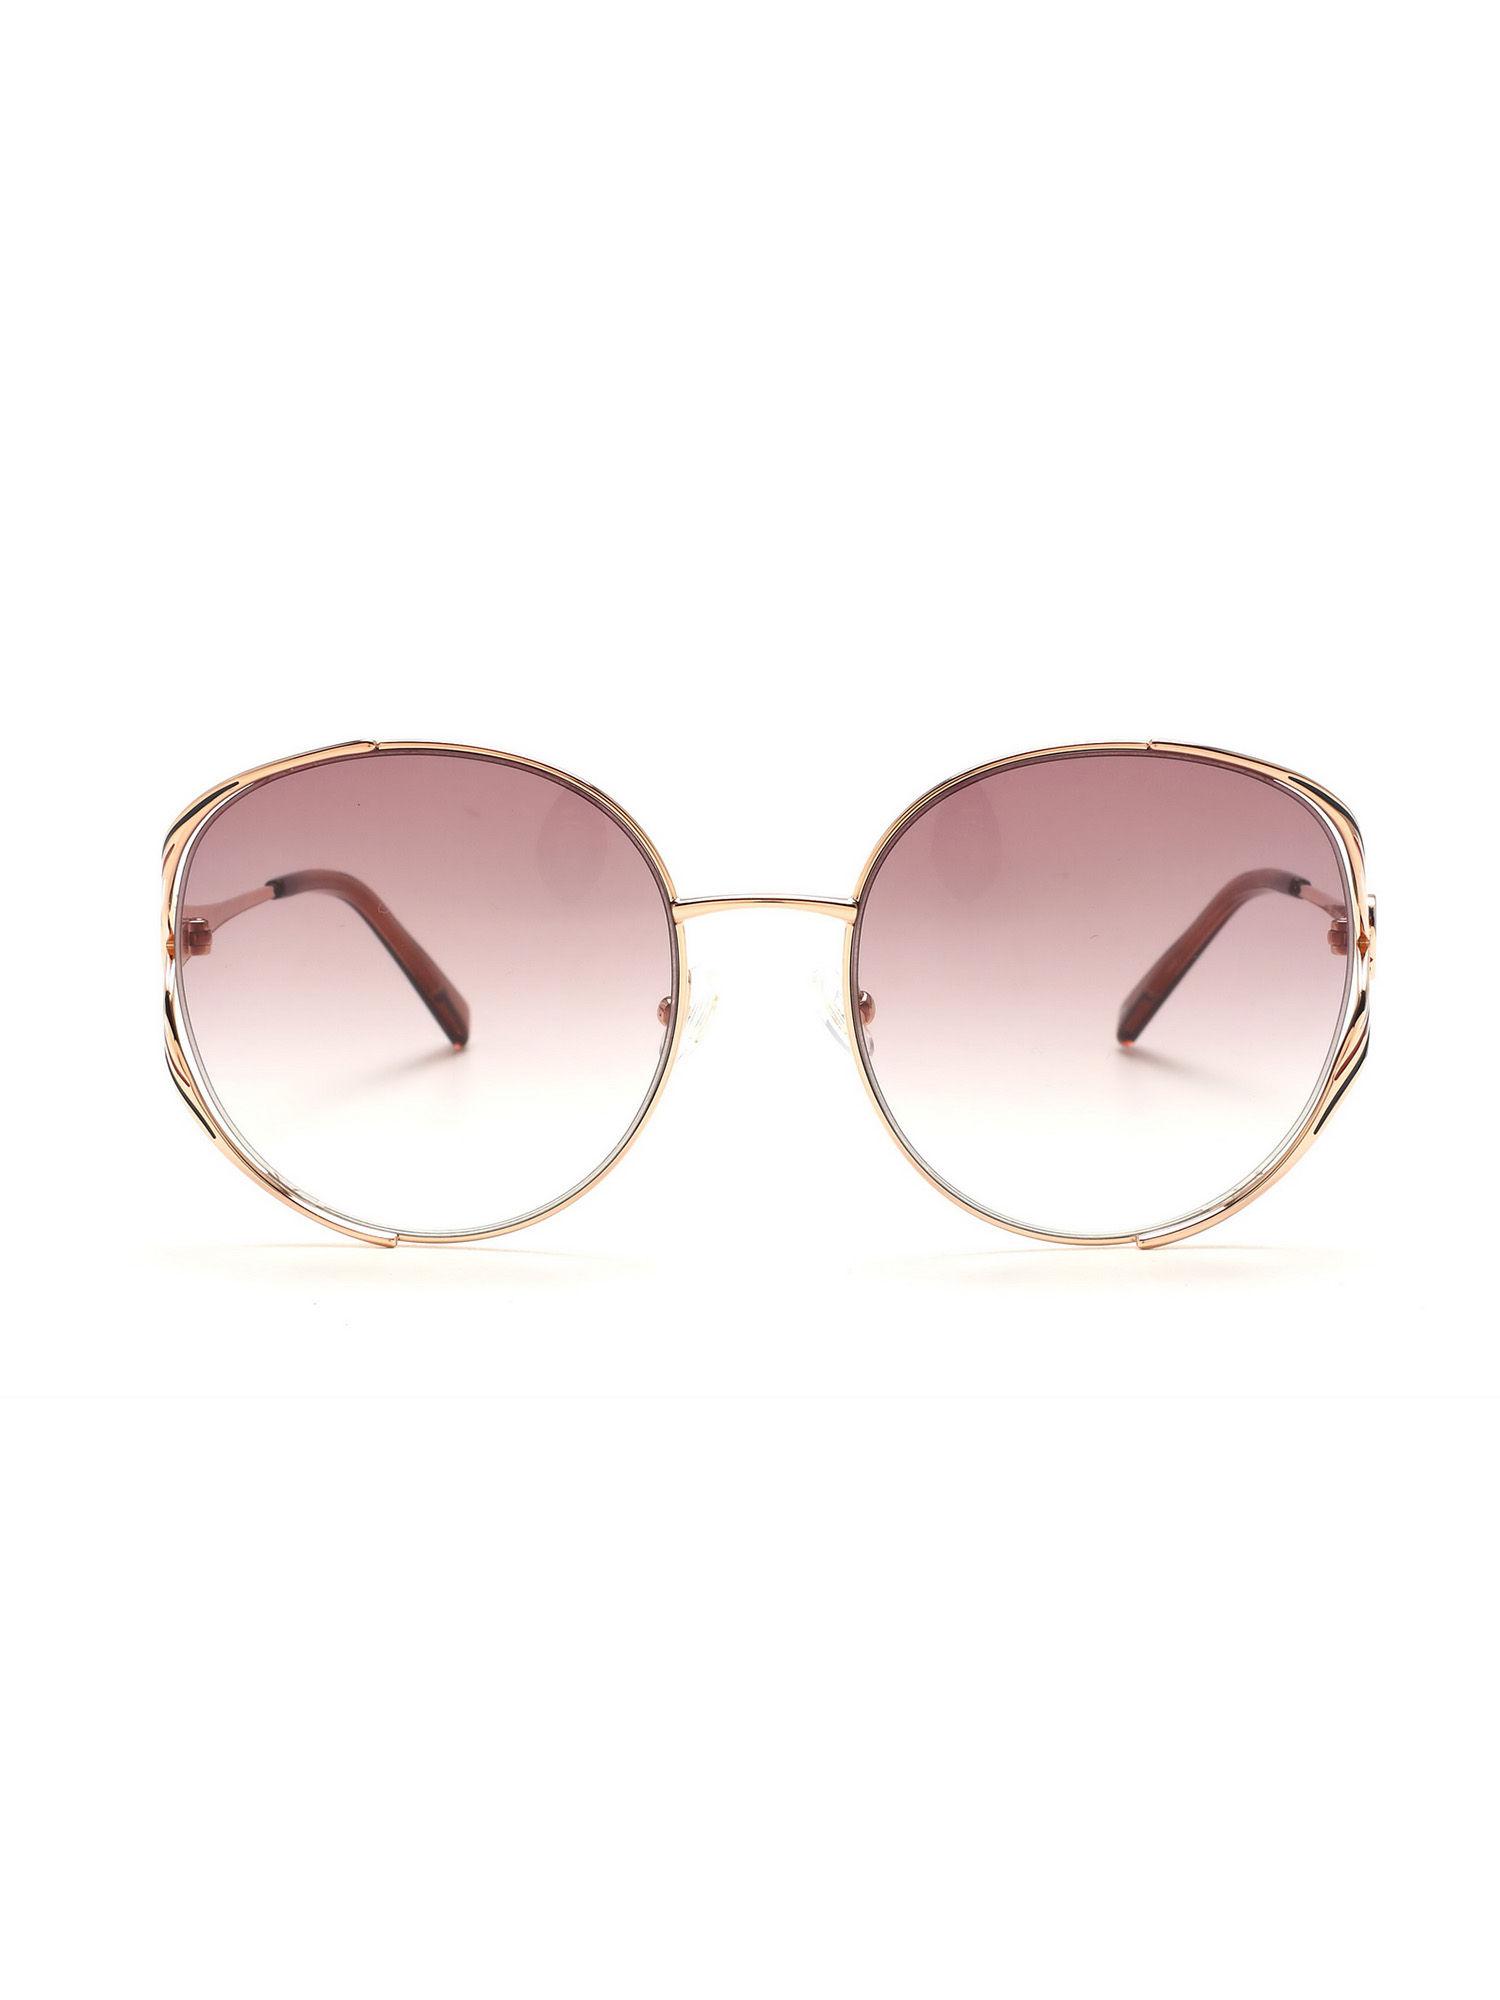 pink-round-sunglasses-full-rim-rose-gold-frame-with-gradient